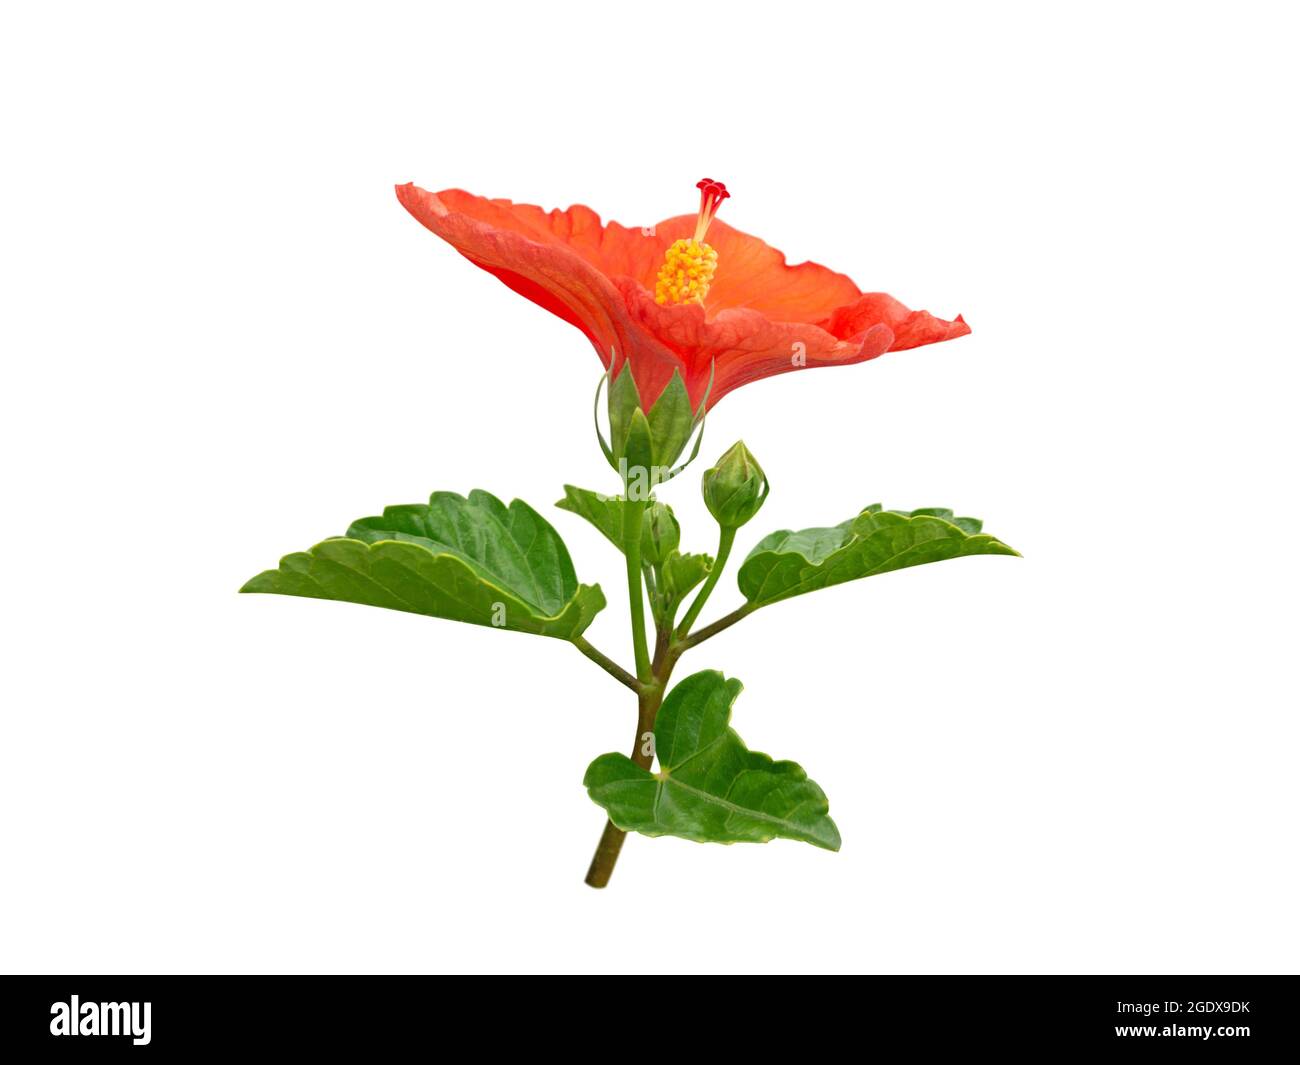 Hibiscus bright red tropical flower branch isolated on white. China rose plant. Malaysia national symbol. Stock Photo